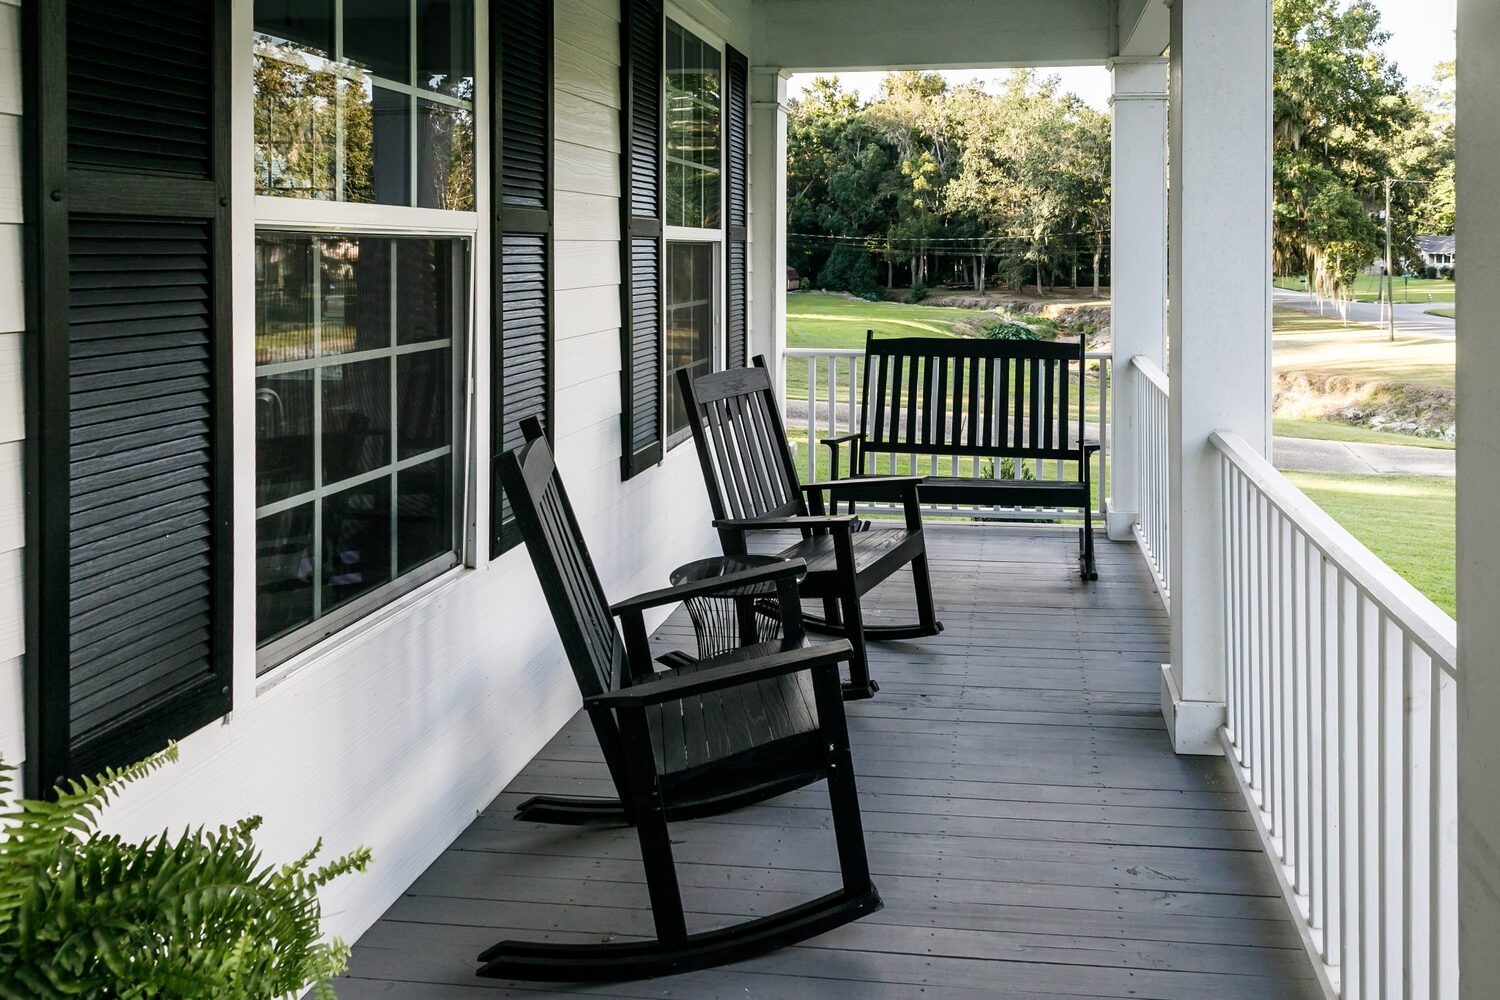 Skilled porch builders Glenview team crafted a gorgeous white wooden porch for the home